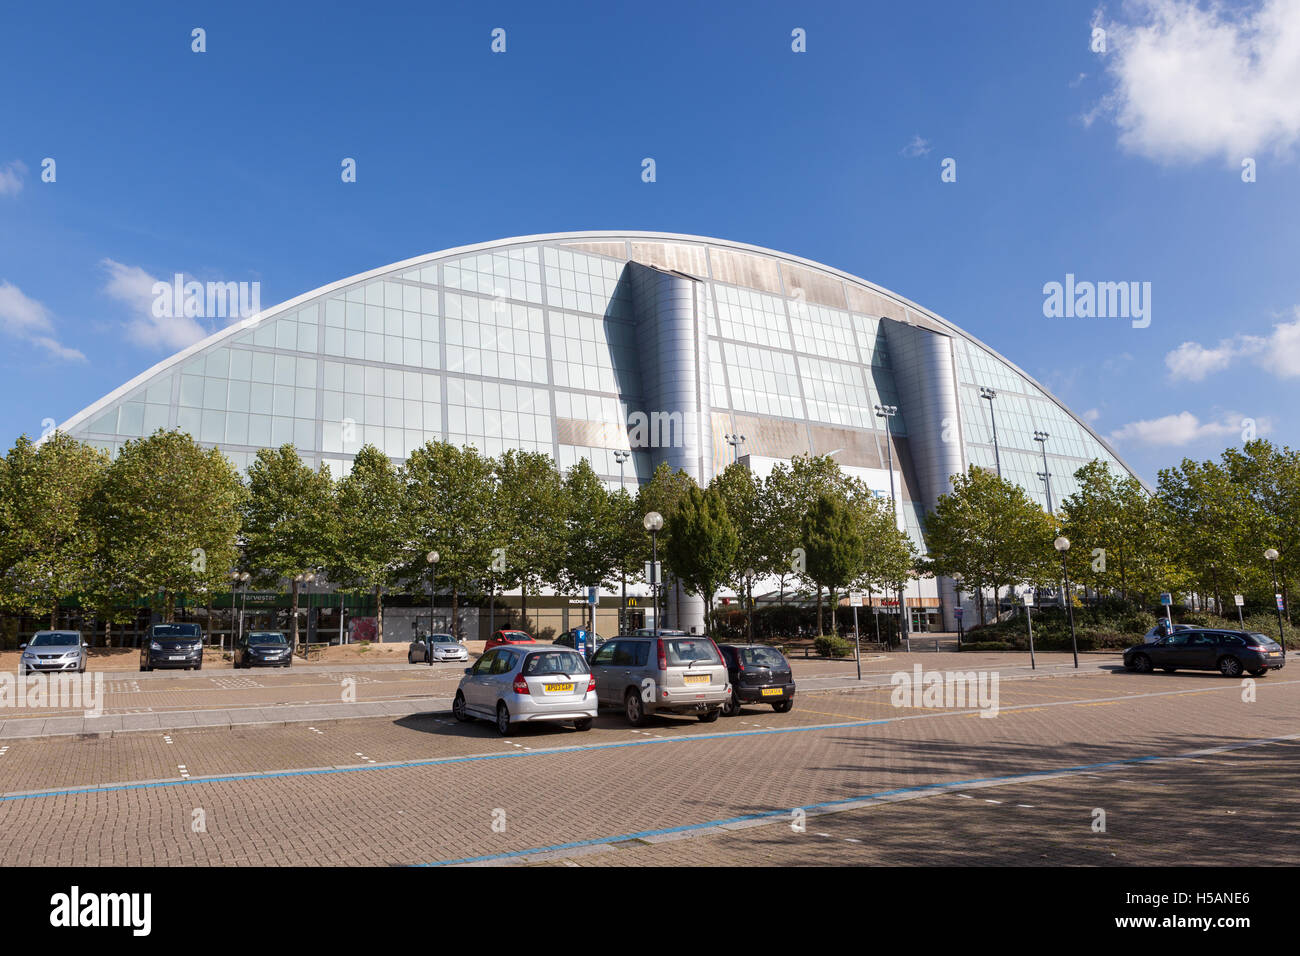 Xscape Milton Keynes is an entertainment destination offering extreme sports and leisure activities. Stock Photo